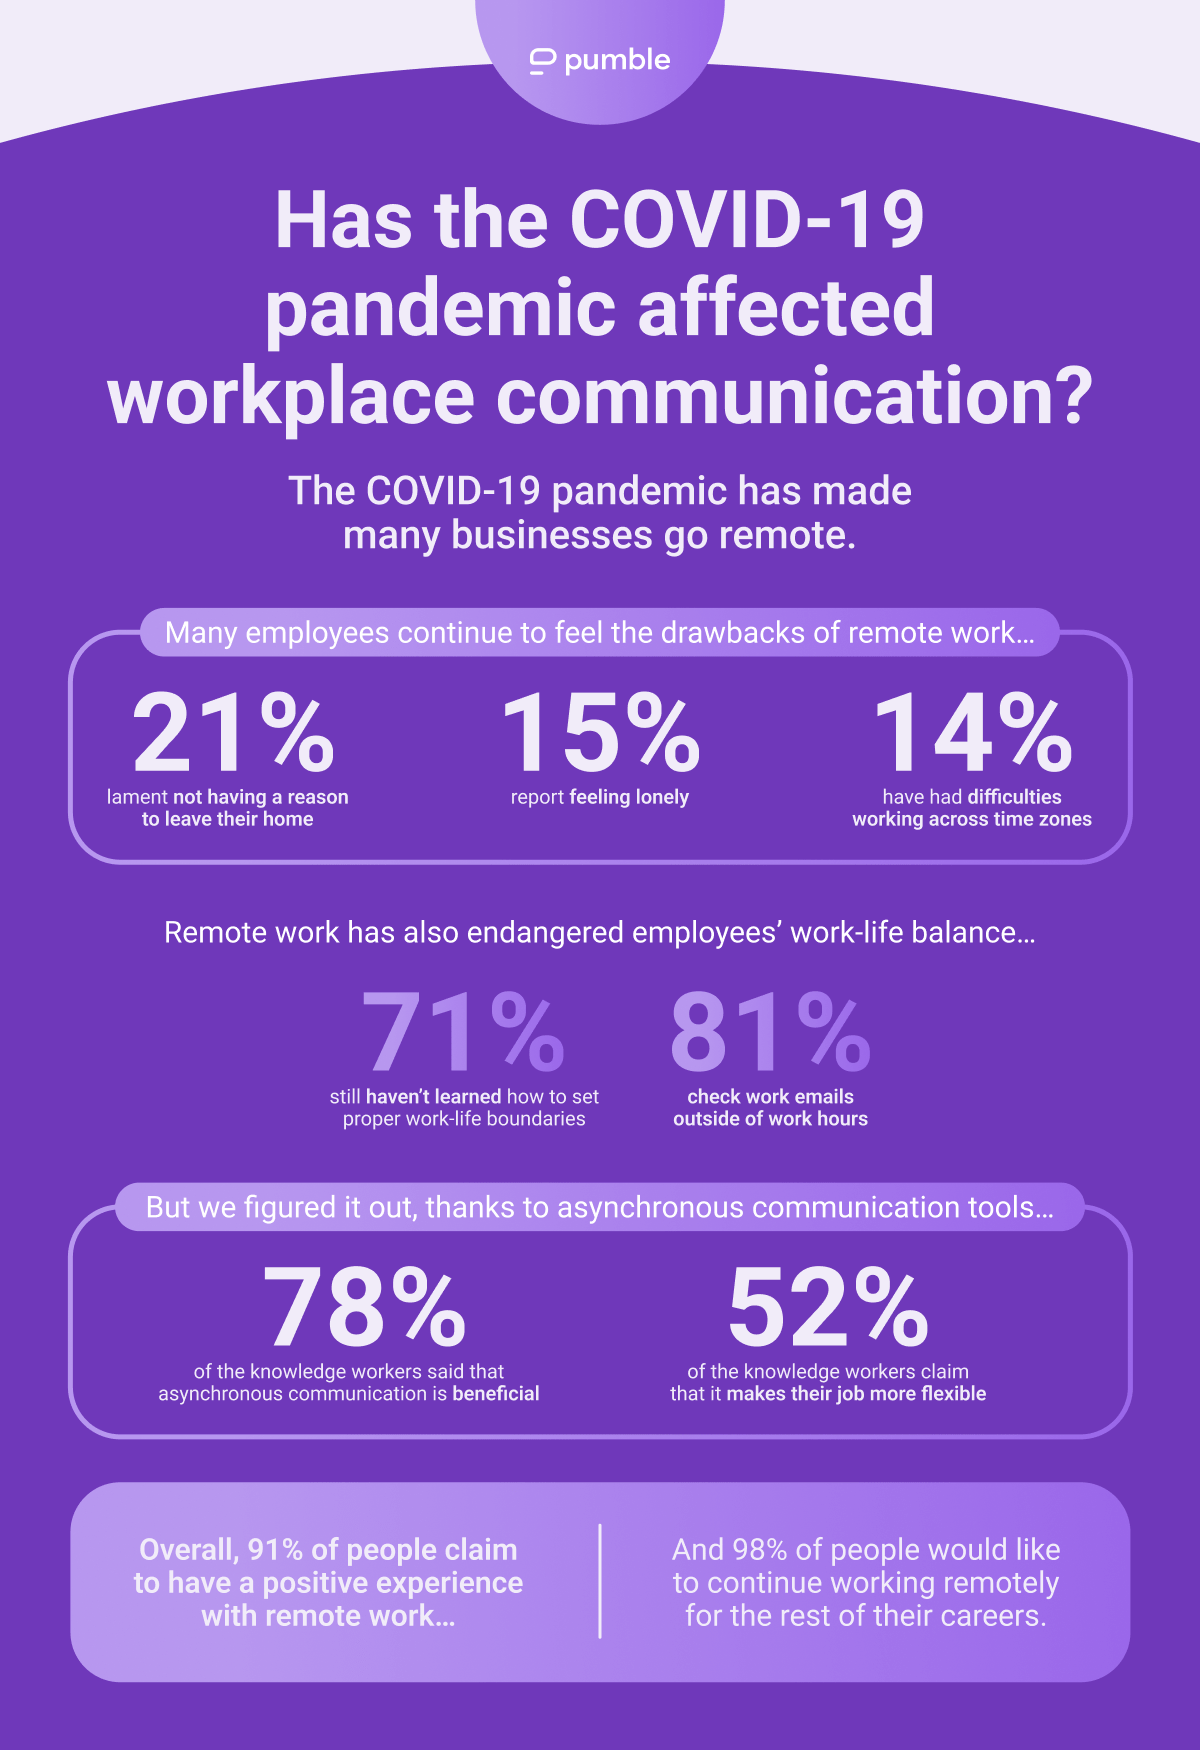 Has the COVID-19 pandemic affected workplace communication